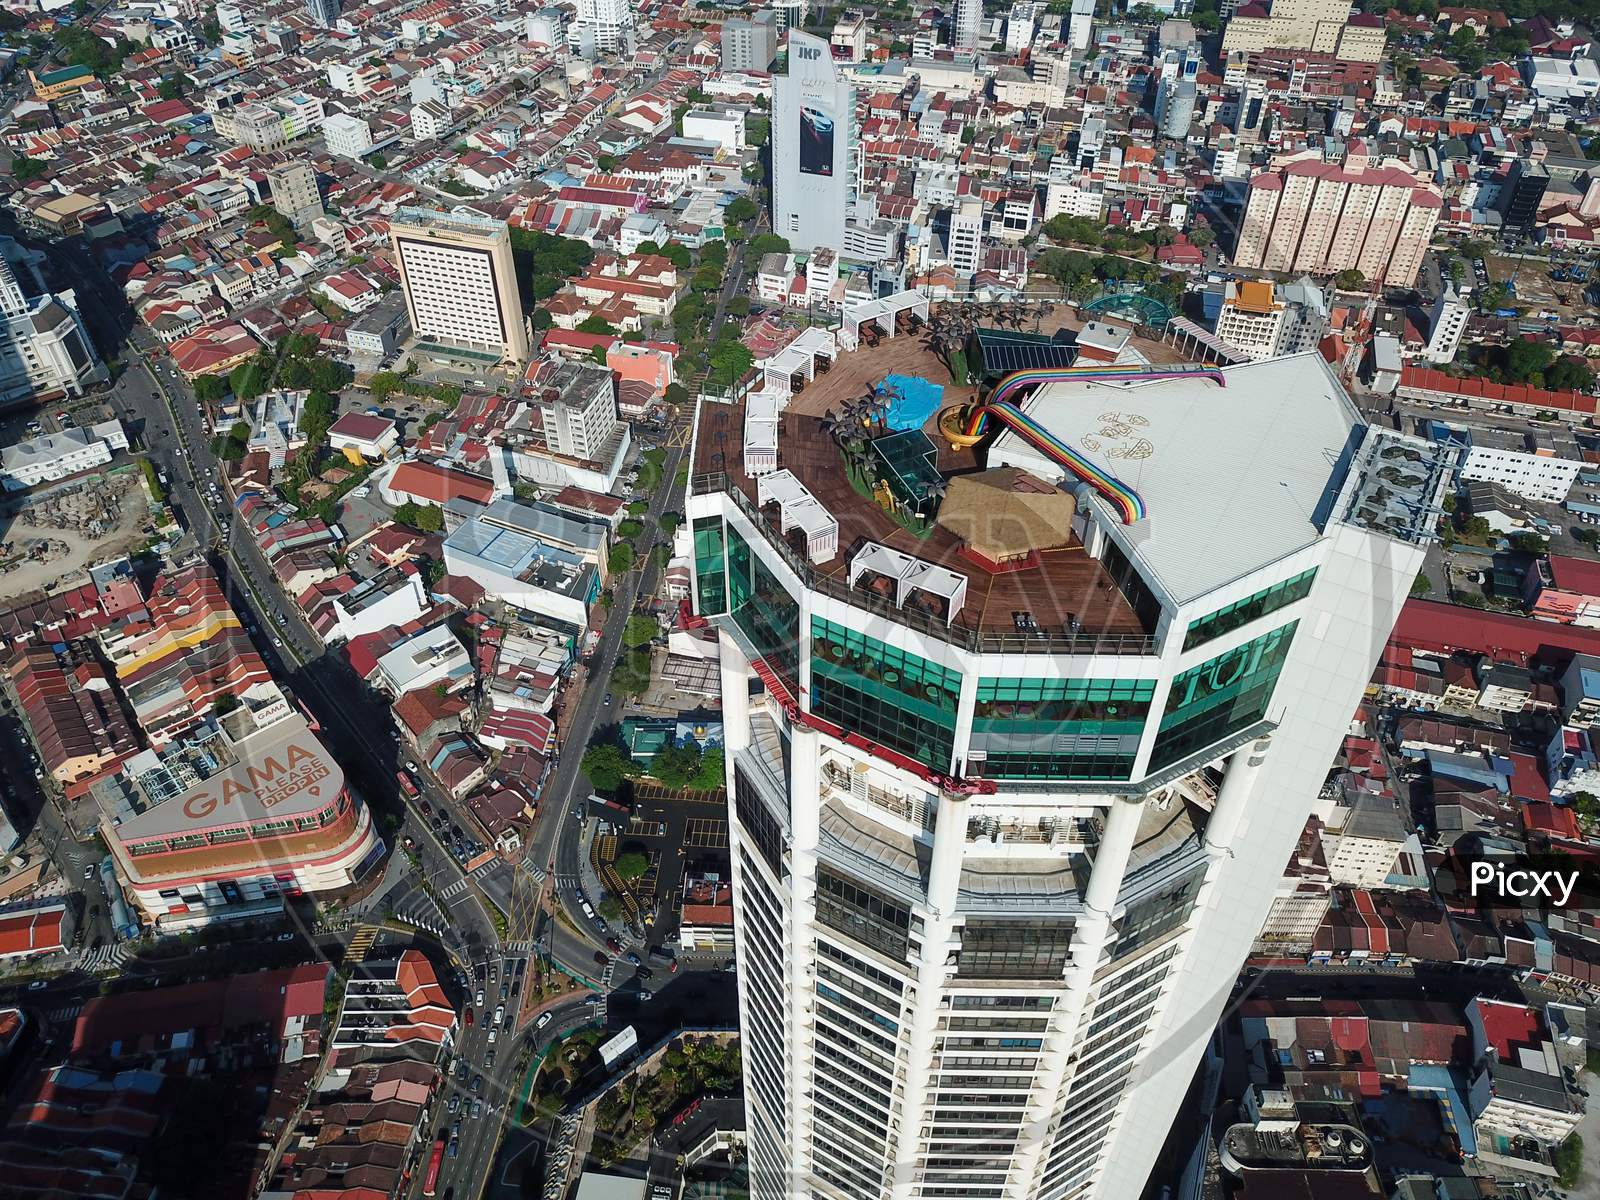 Komtar And Gama In Drone View